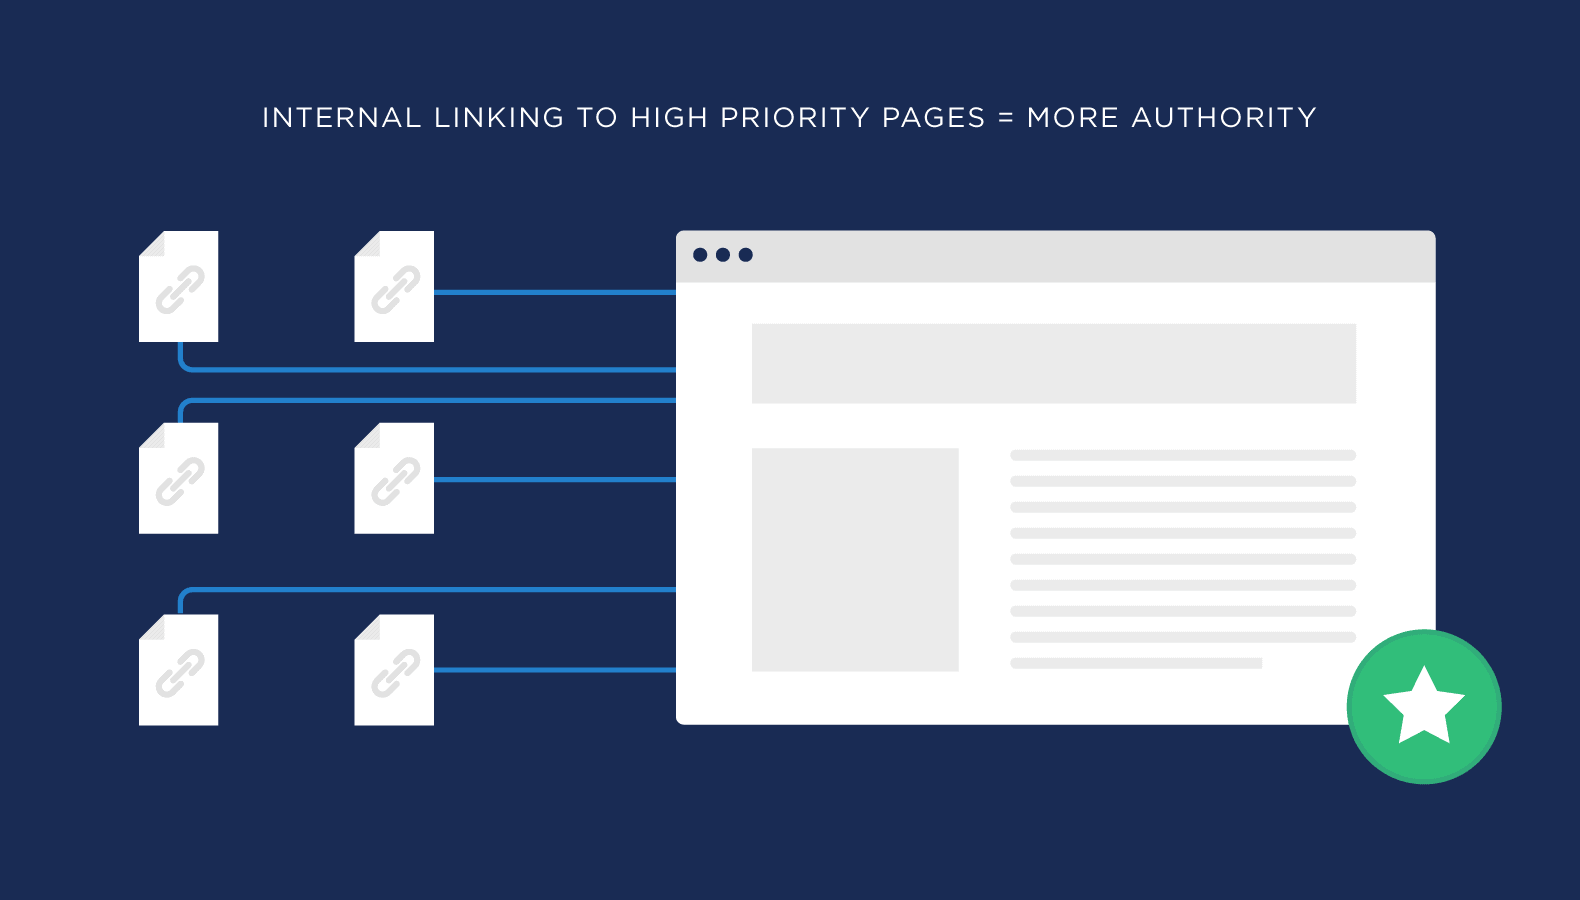 Internal linking to high priority pages means more authority